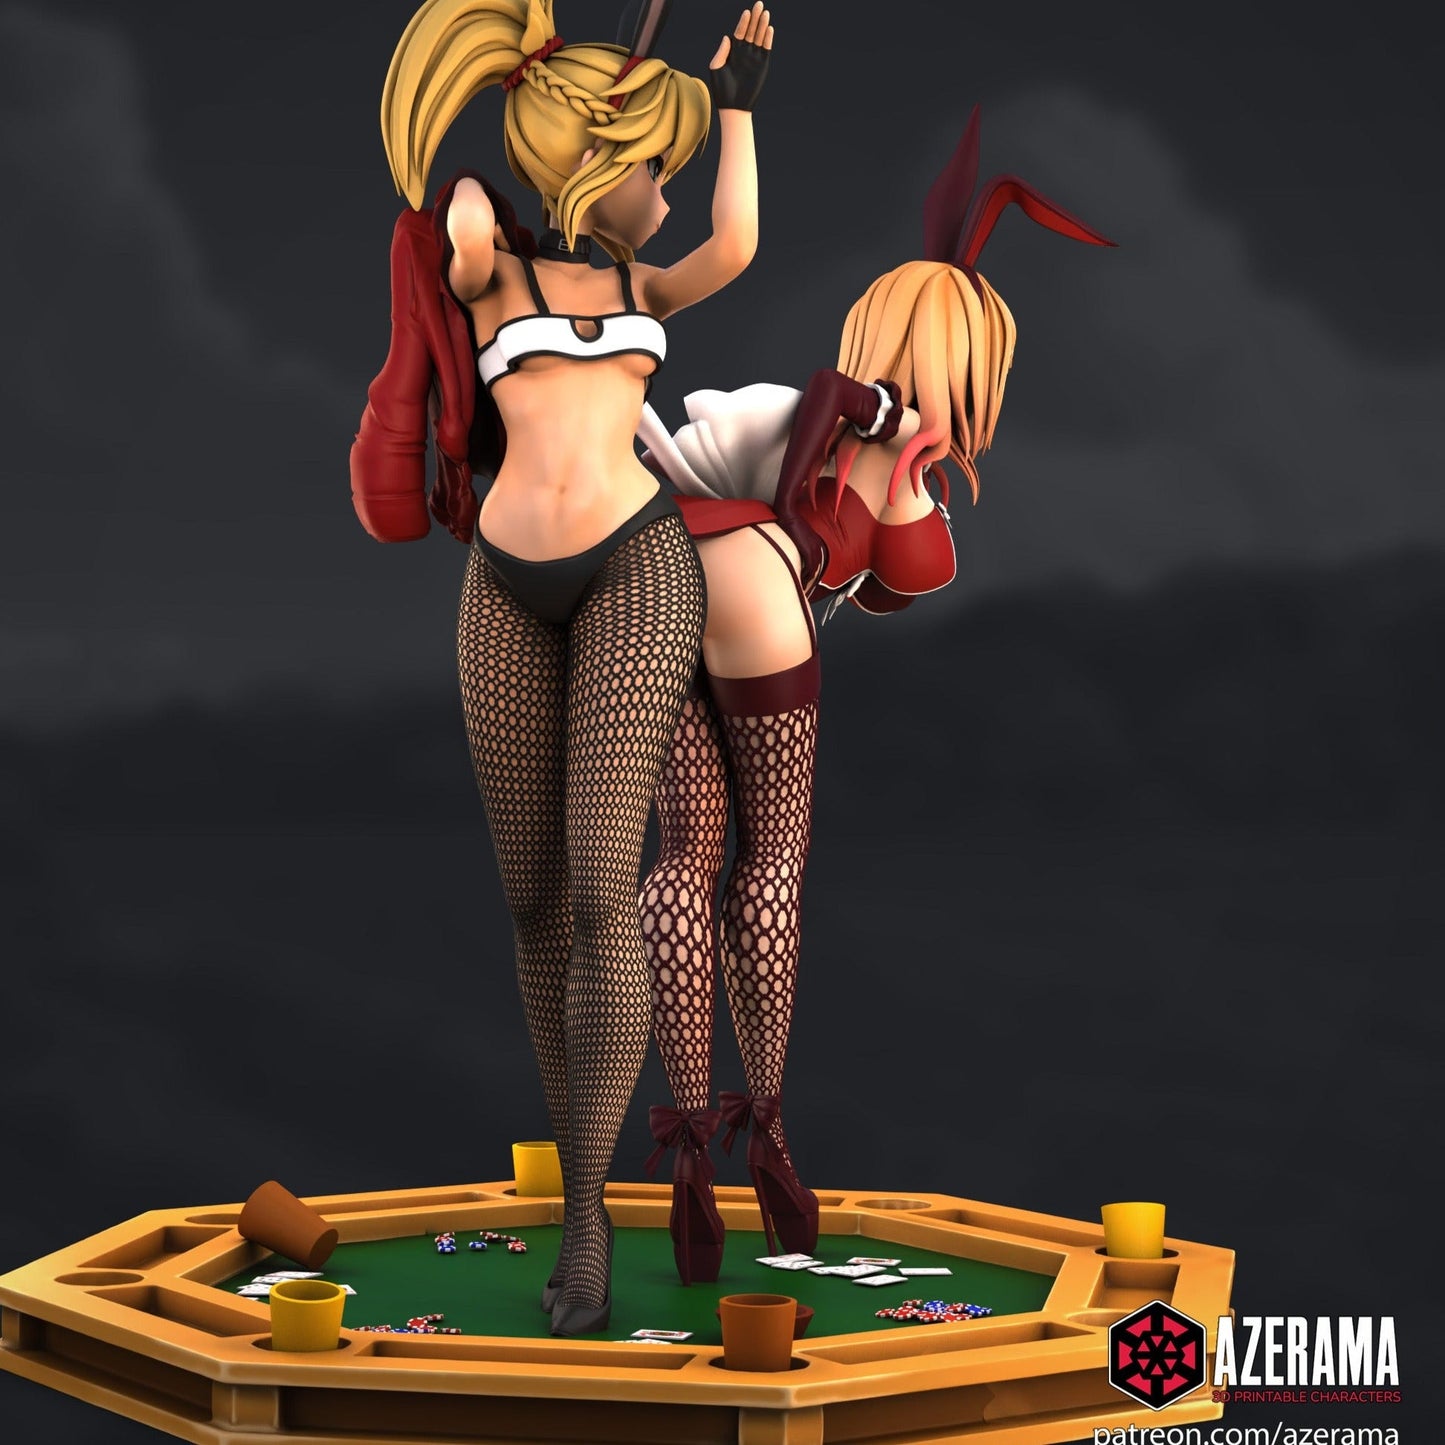 Resin Model Kit Bunny girls Mordred and Marin 3d Printed Figurine Collectable Fanart DIY by Azerama